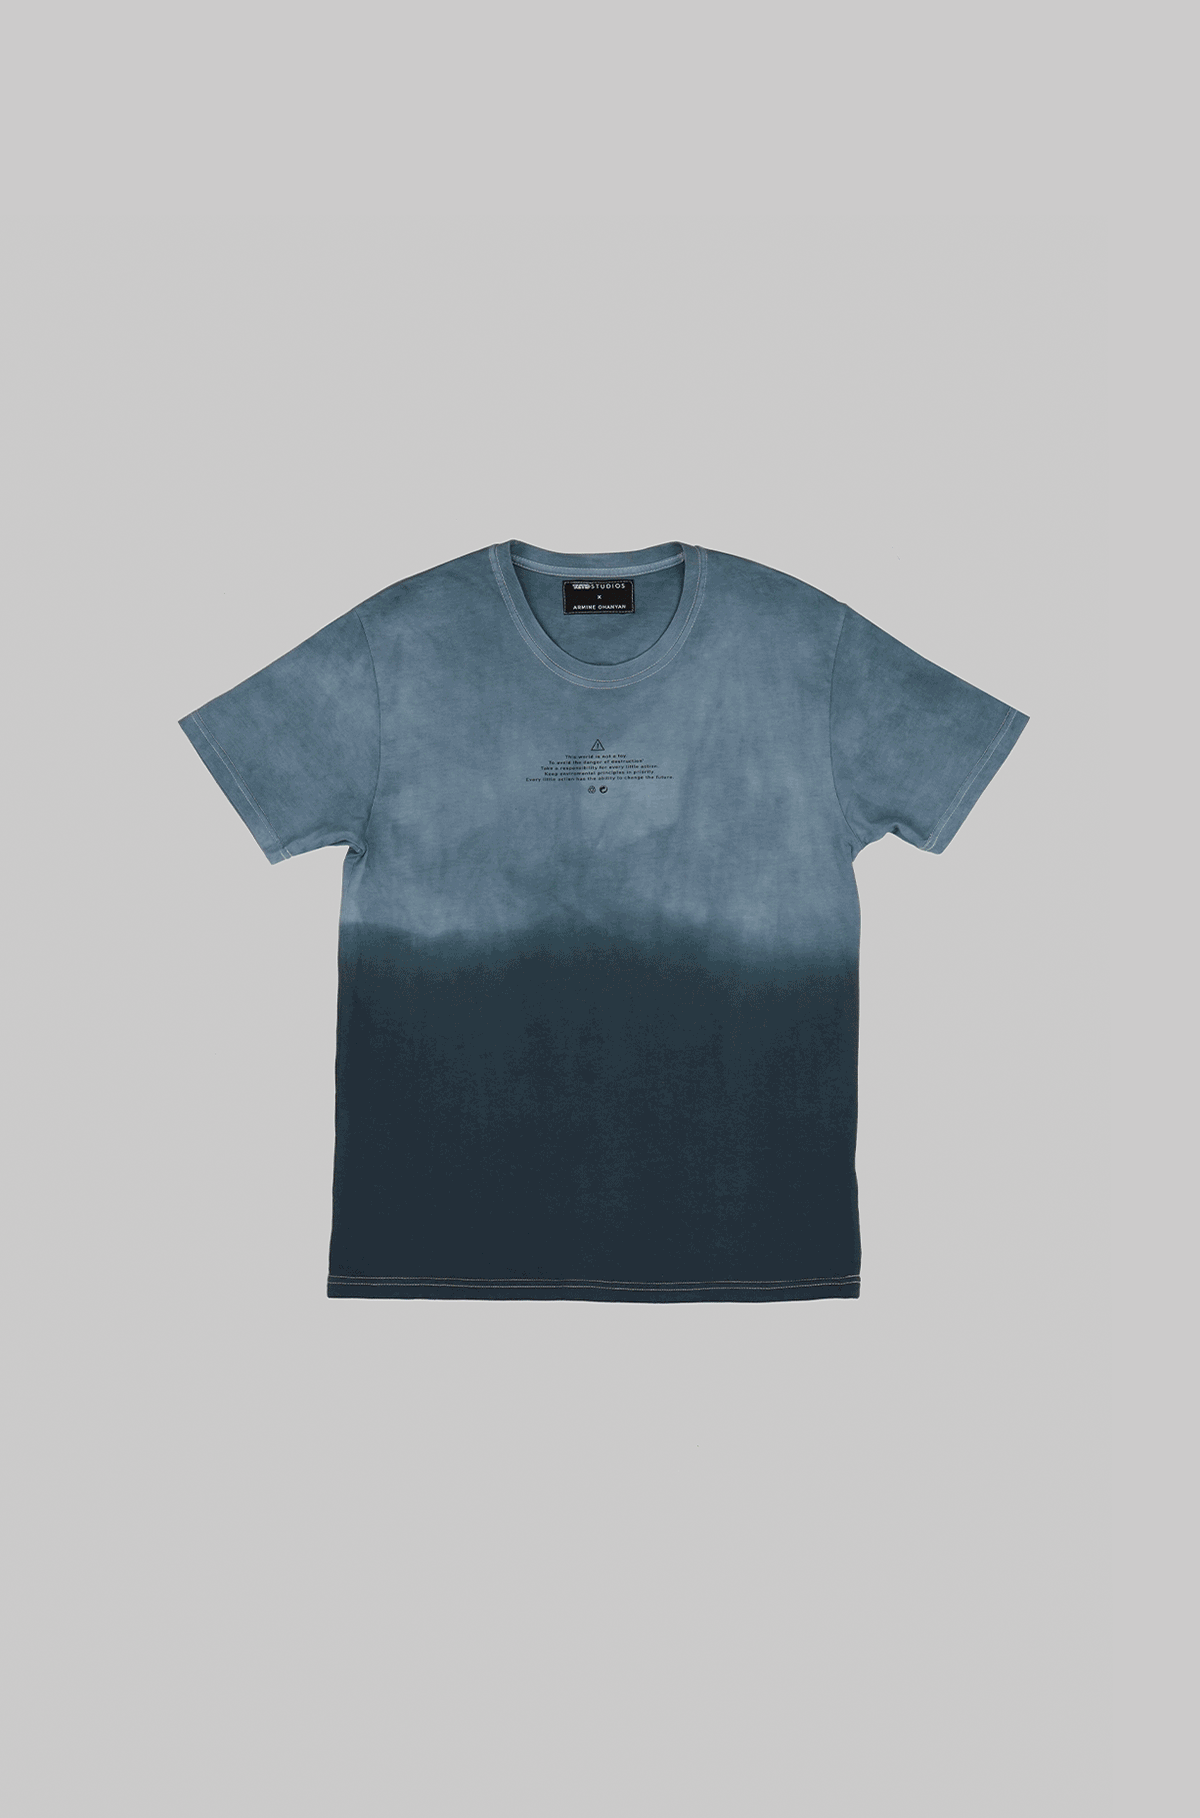 Oversized unisex t-shirt with natural dye for pre-order